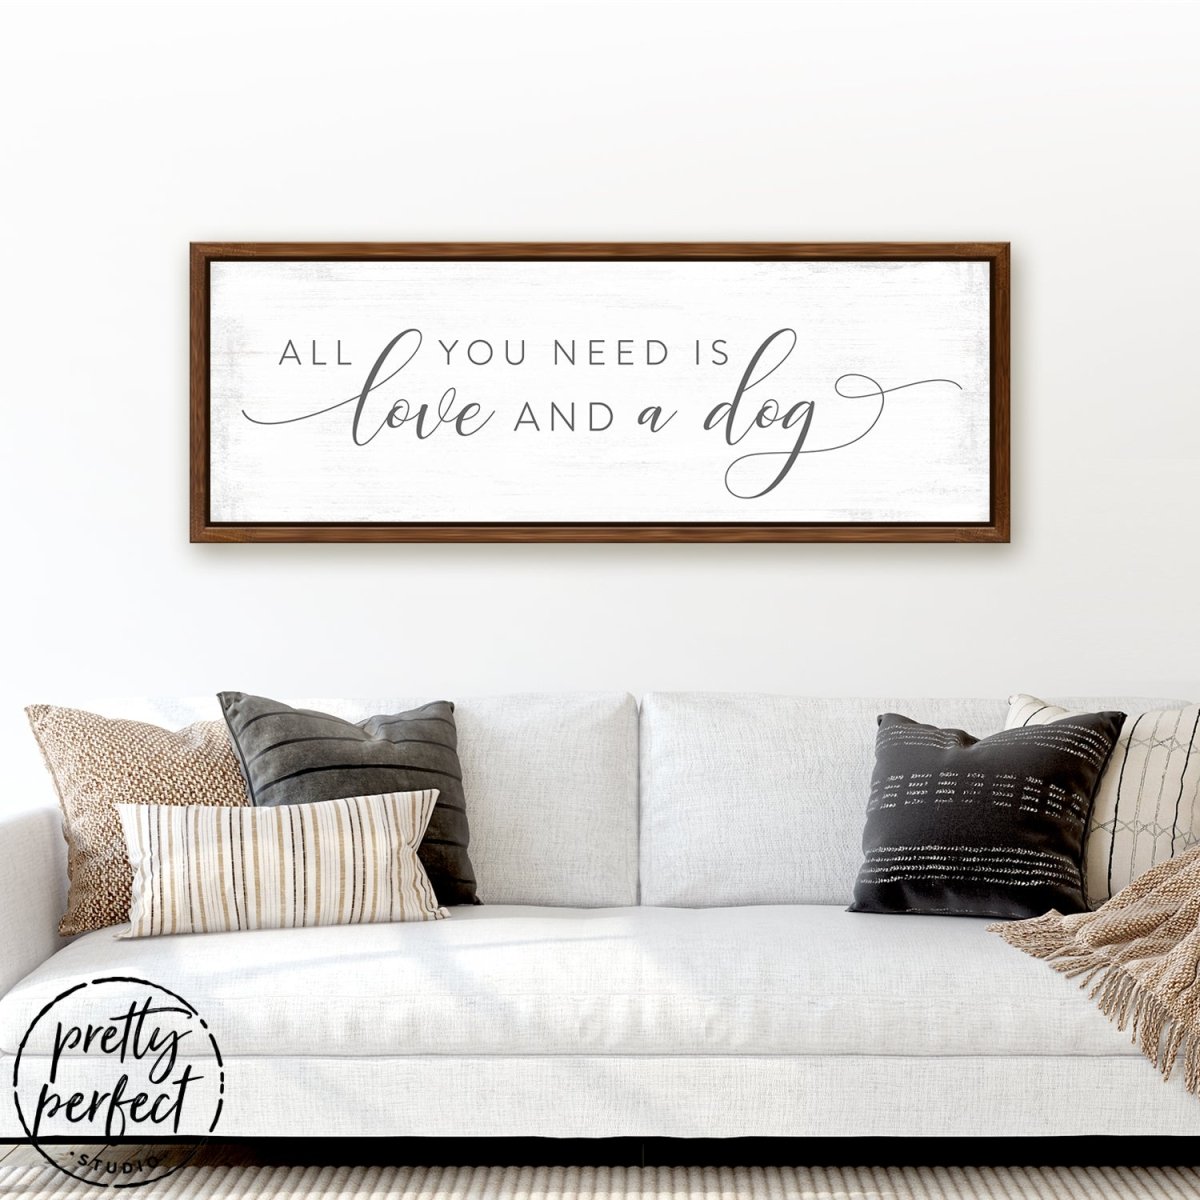 All You Need Is Love And A Dog Canvas Sign Above Couch - Pretty Perfect Studio